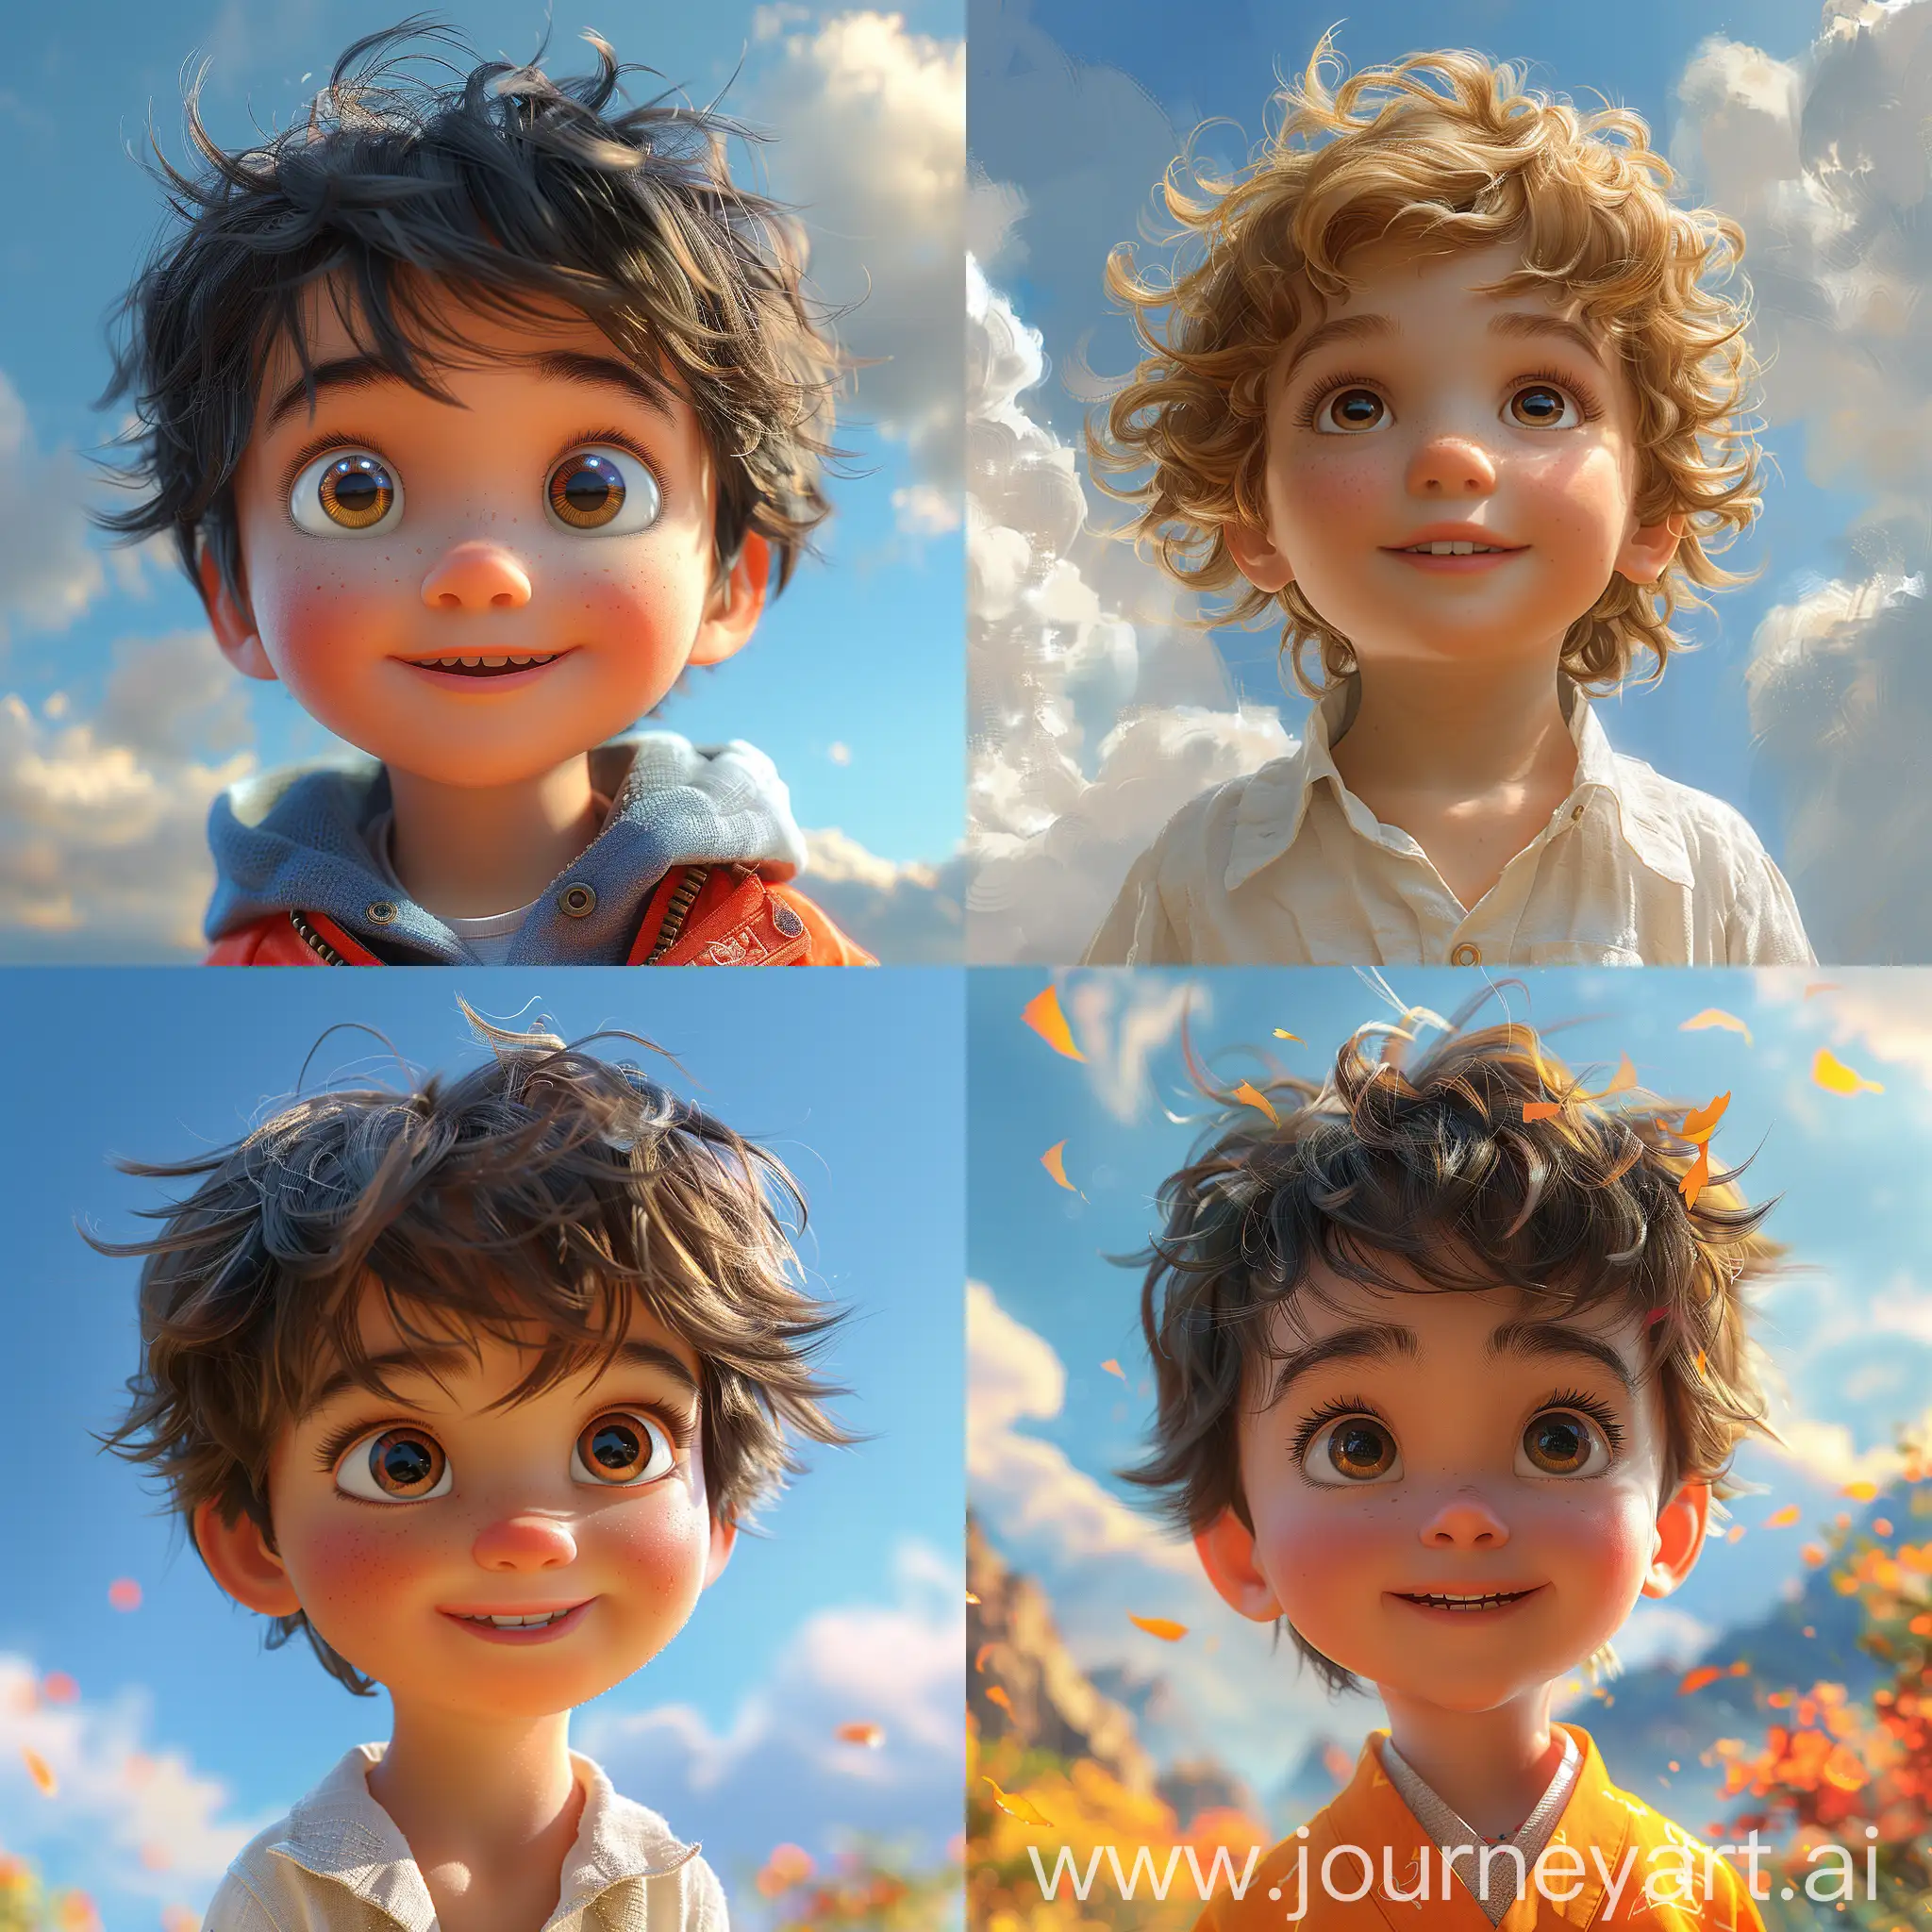 A young boy, Disney Prince, baby face, exquisite facial features, big eyes, high nose, smiling lips, fantastic style, vast sky, bold and colorful portraits, bayard wu, rtx, spotlight, game cg, 3D, --iw 0.5 --s 750